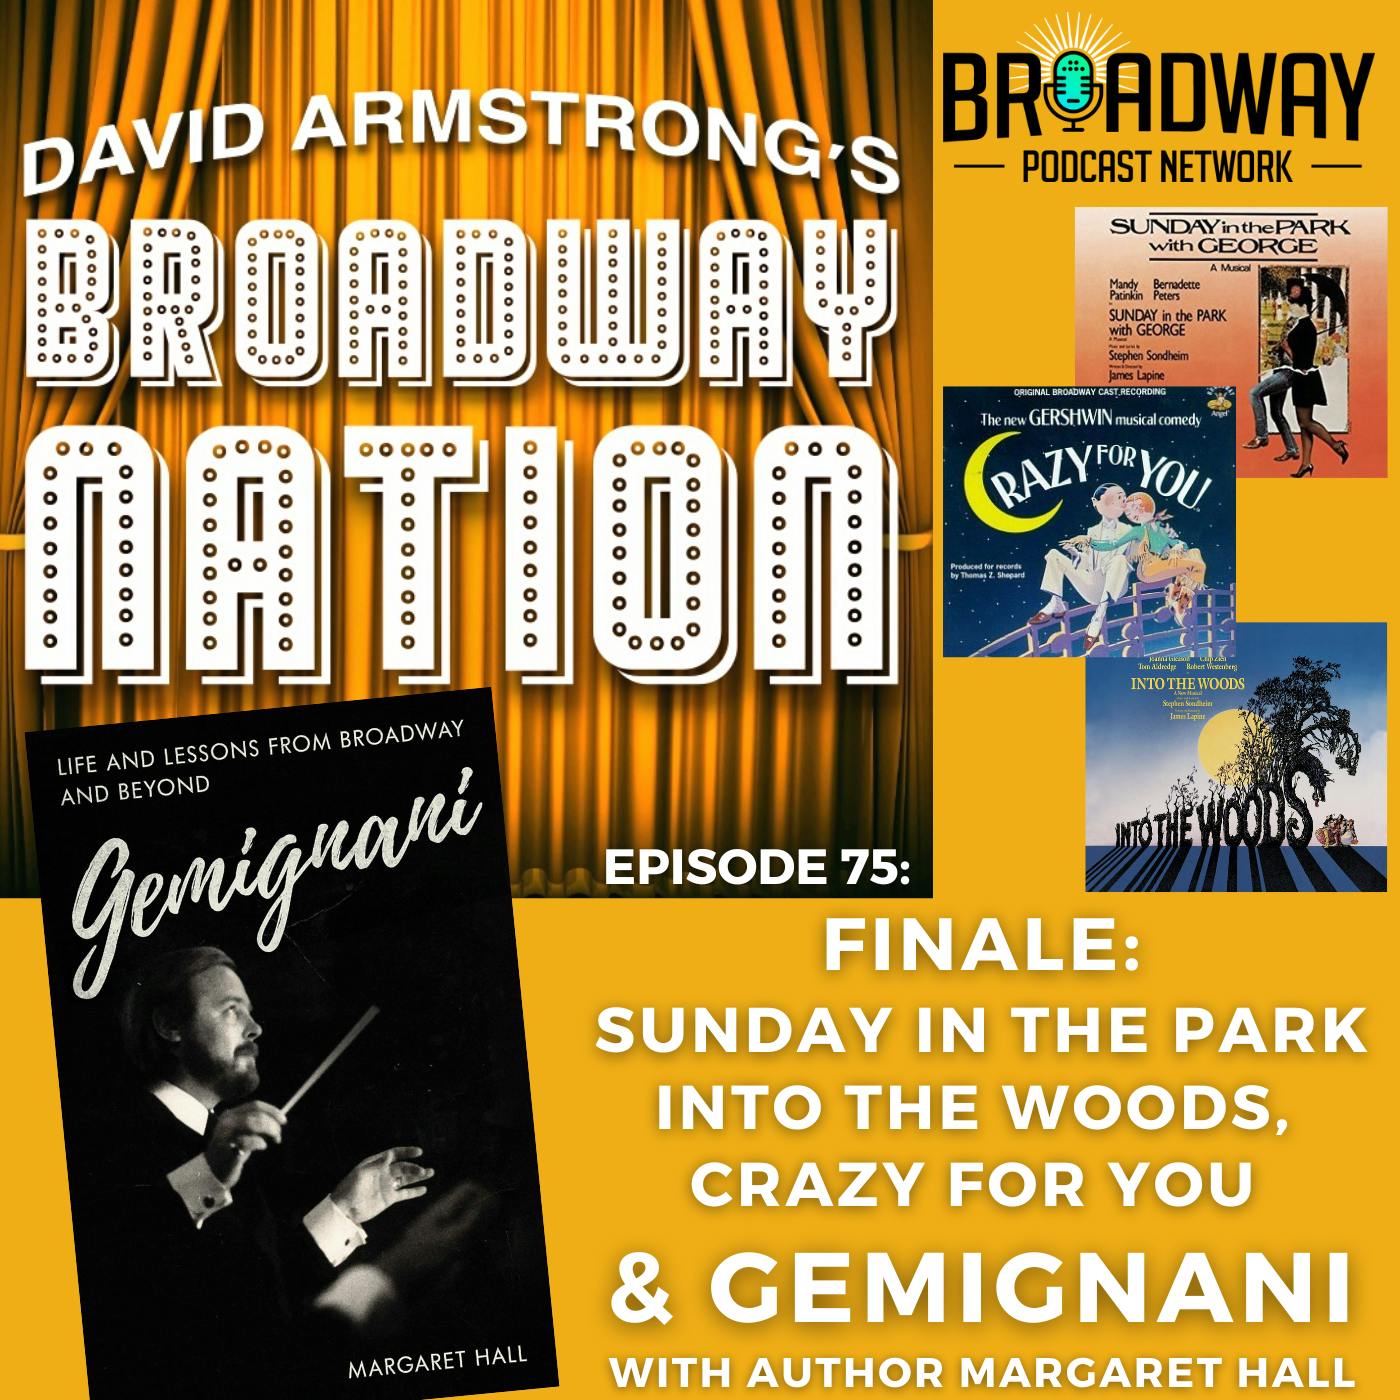 Episode 75: FINALE: Sunday In The Park, Into The Woods, Crazy For You & GEMIGNANI Image